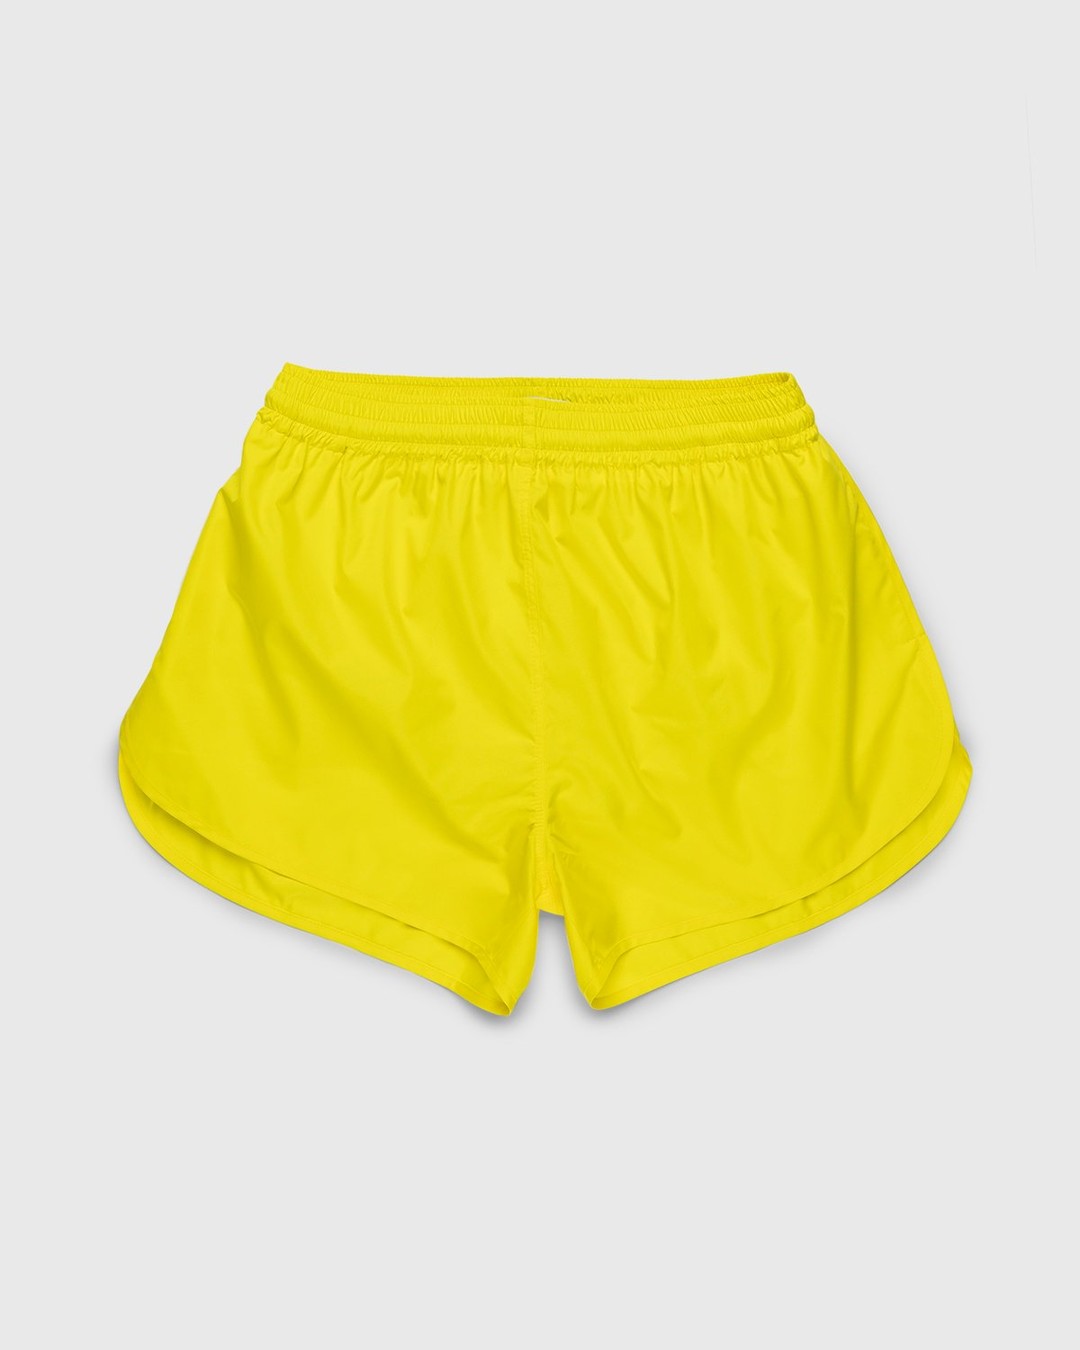 J.W. Anderson – Polyester Running Shorts Yellow - Short Cuts - Yellow - Image 1